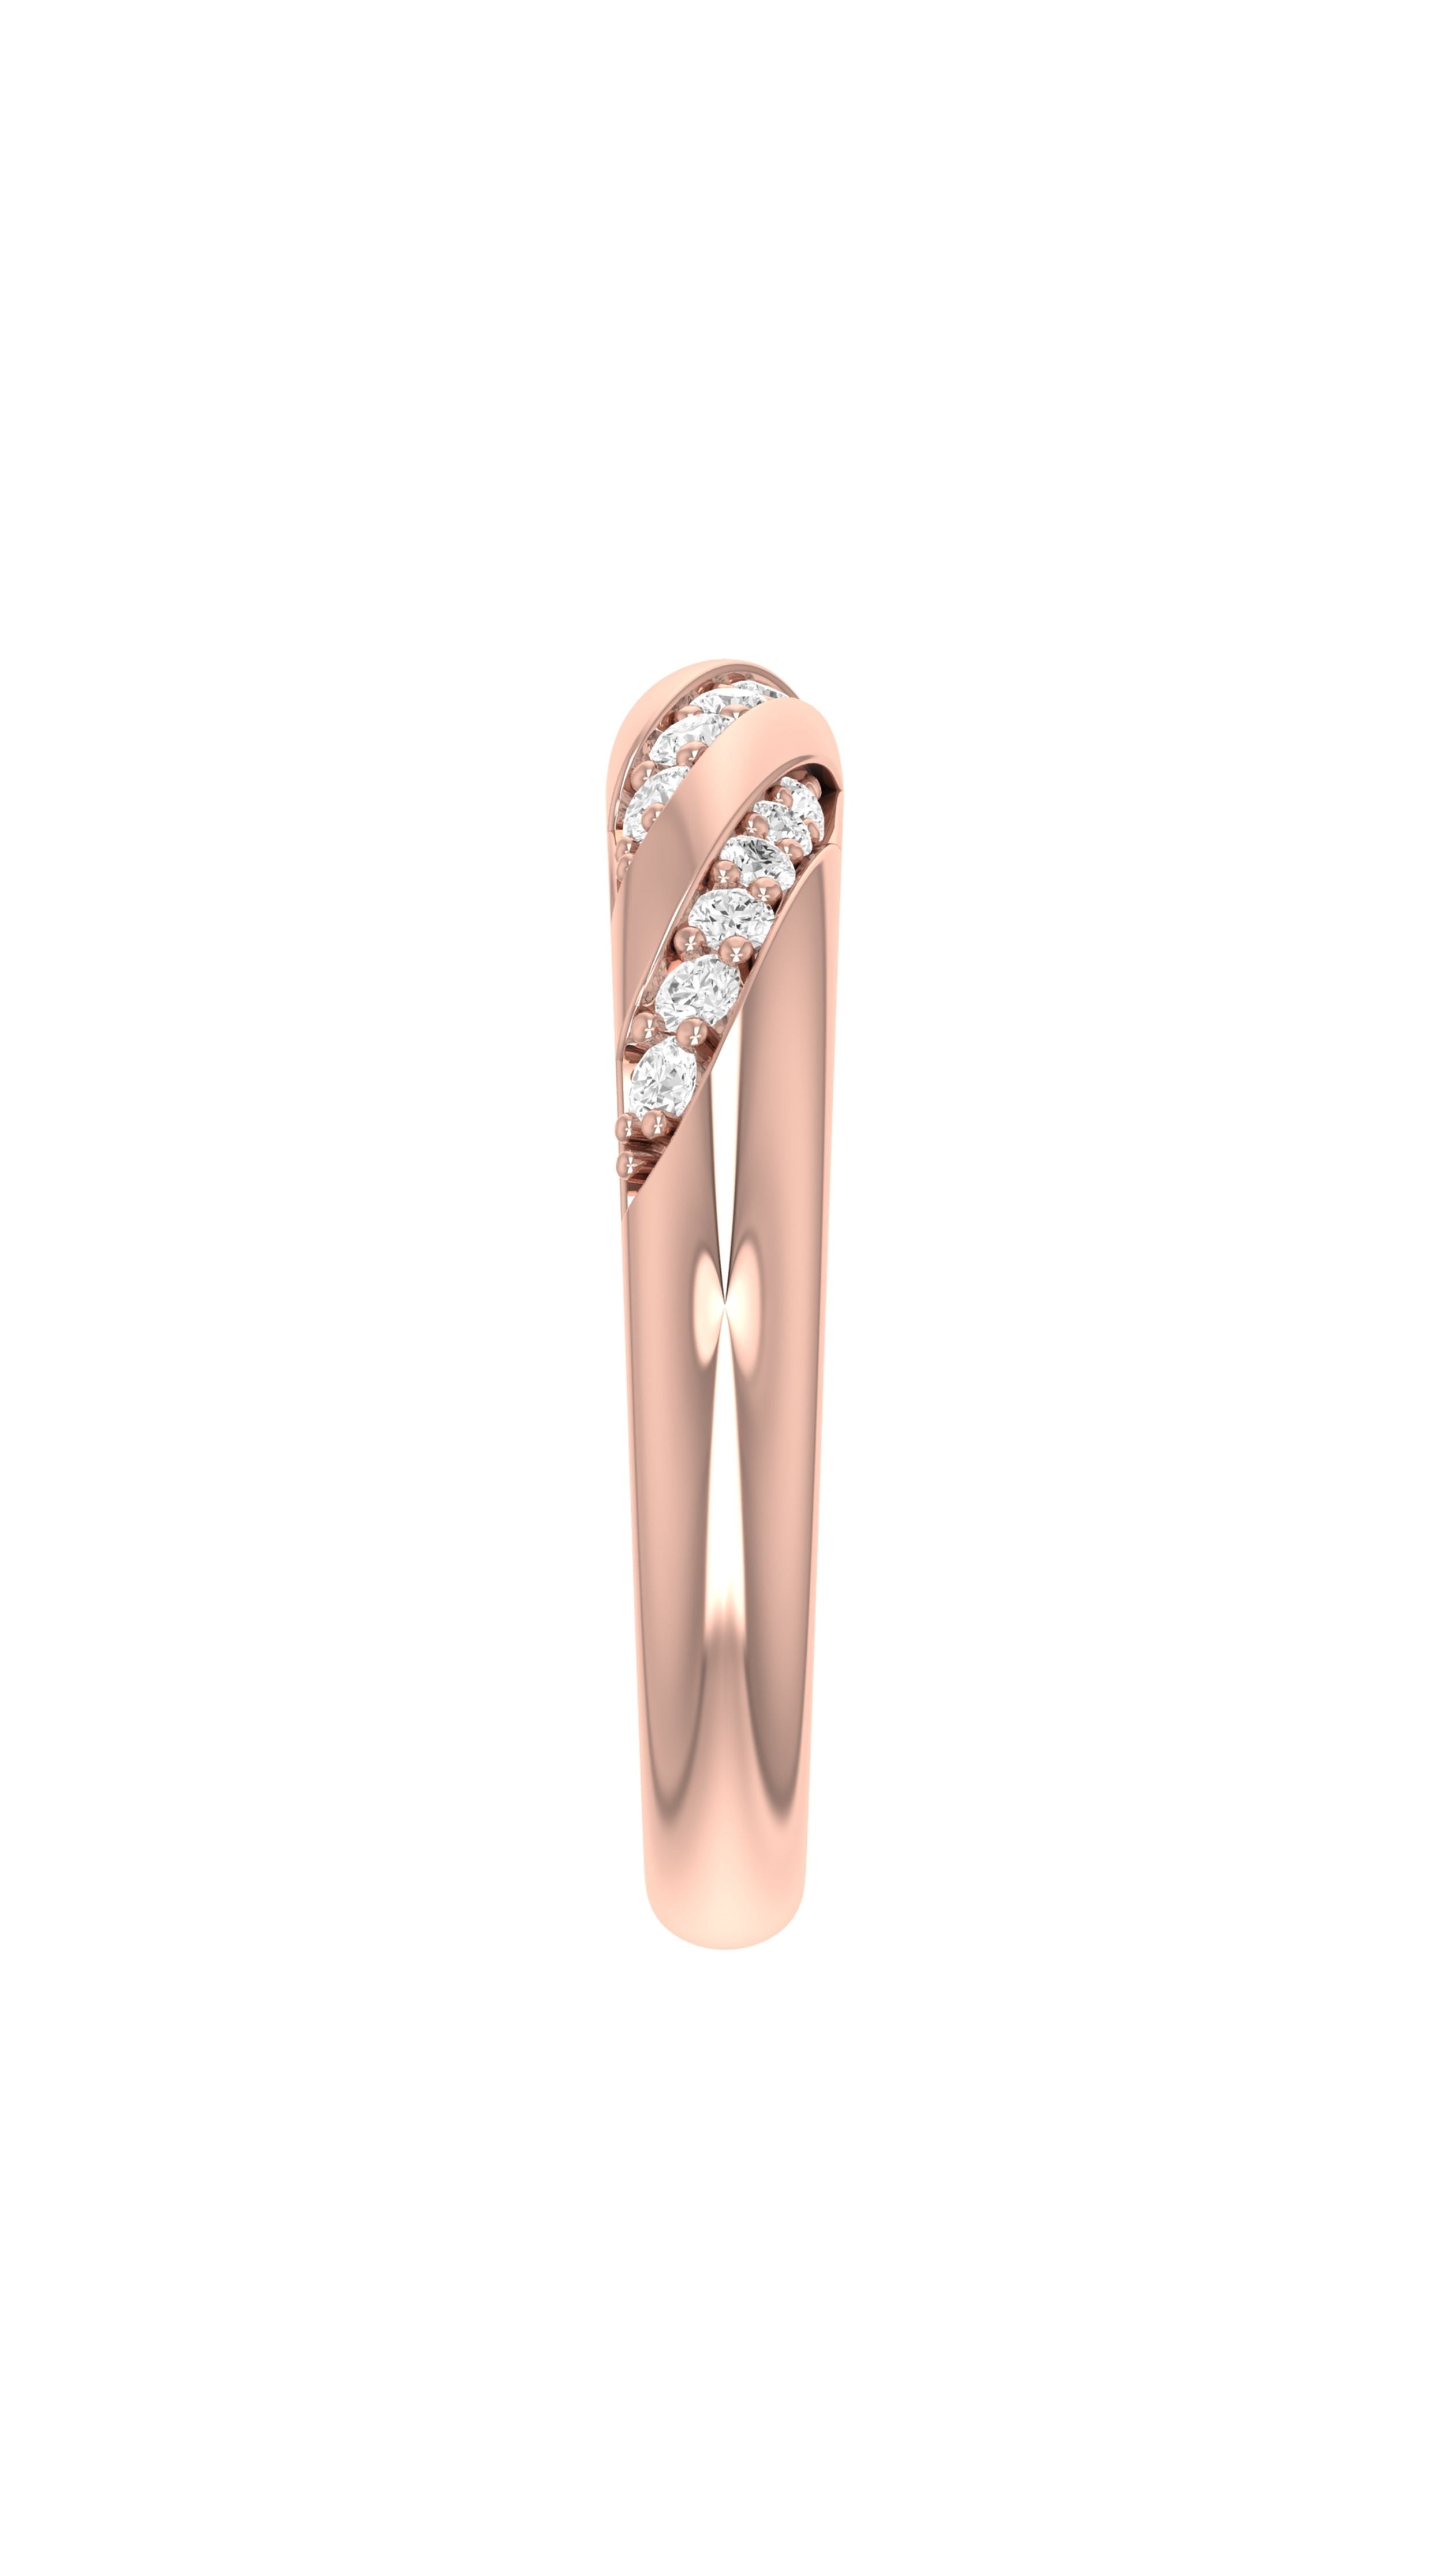 Conde de diamante Elisa ring. The Elisa Ring features a stunning twist of 18K rose gold, adorned with a pave of sparkling diamonds. Delicately rounded and elegant. Shown from the side view.